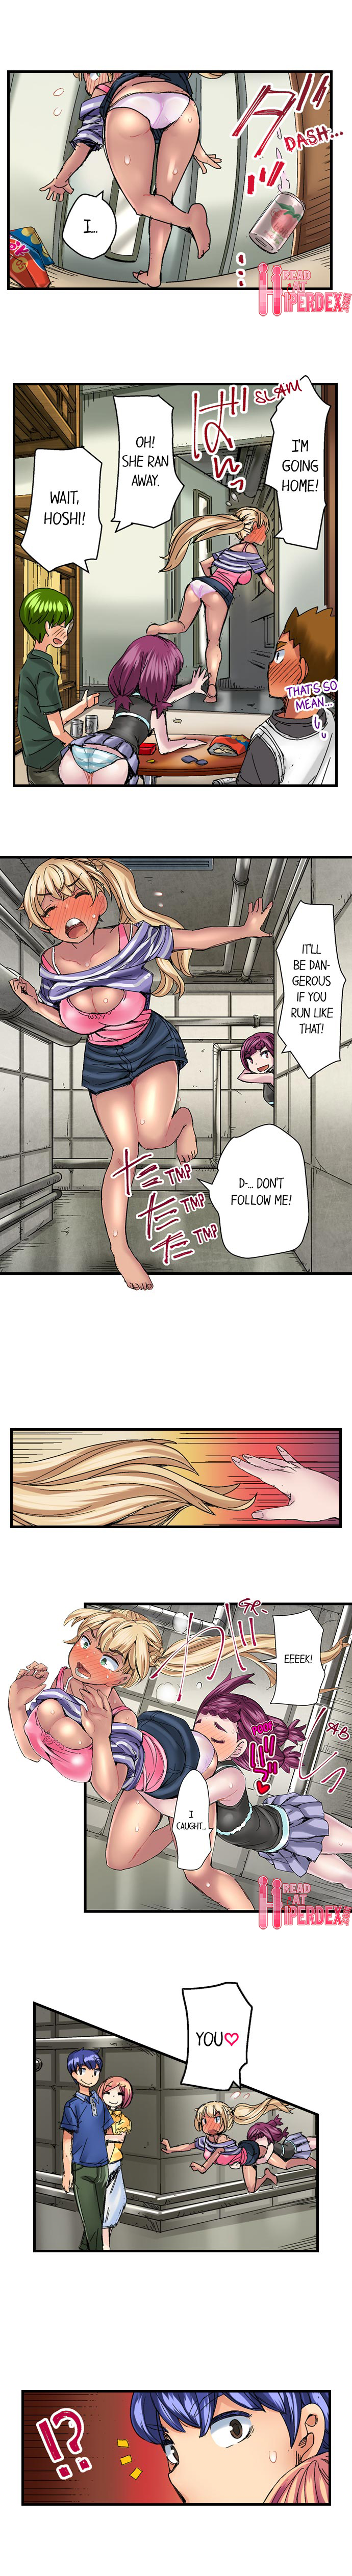 Taking a Hot Tanned Chick’s Virginity - Chapter 25 Page 4